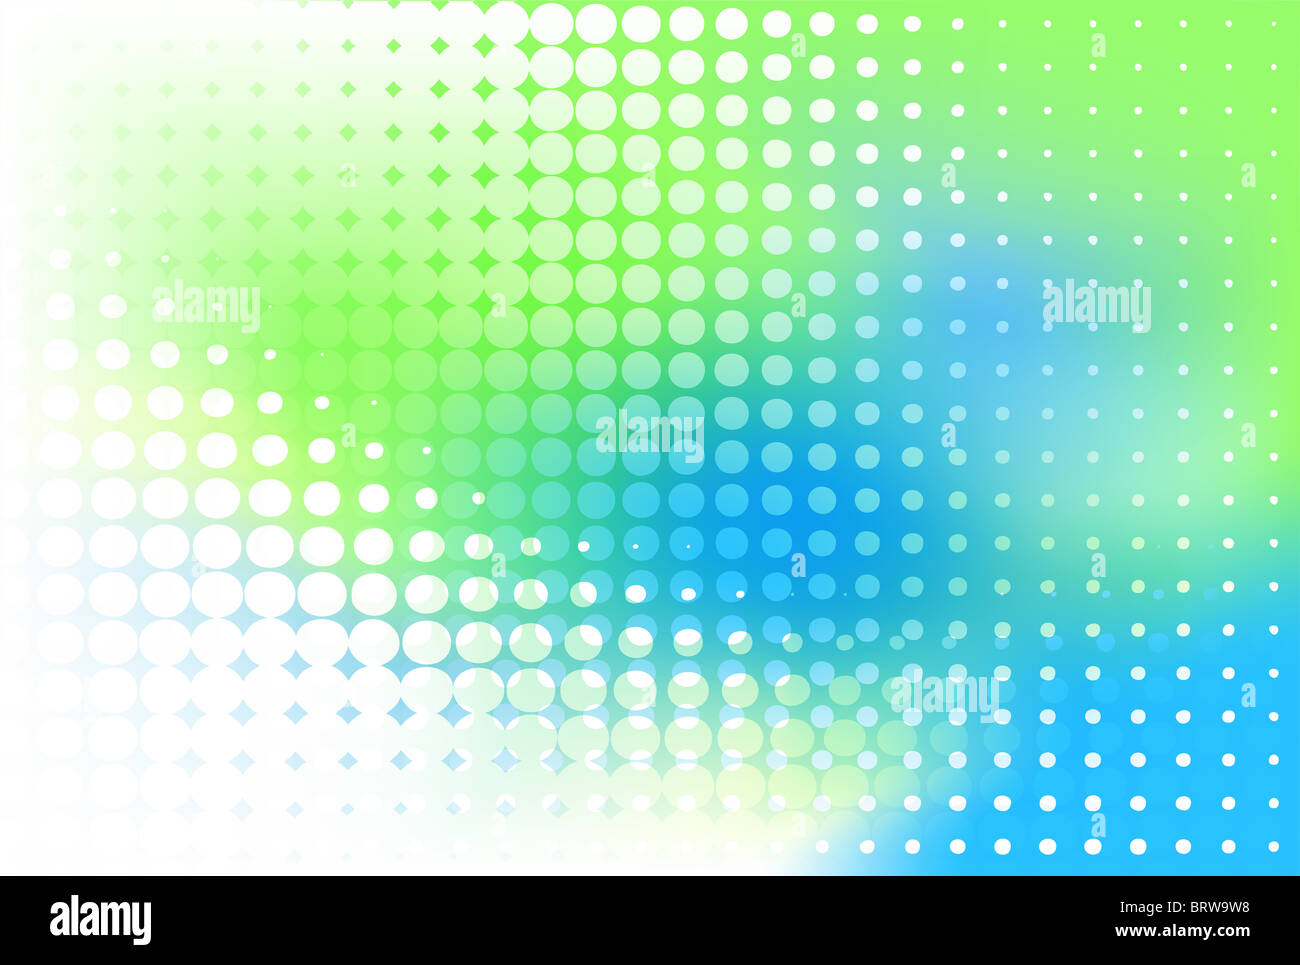 Abstract background halftone design in blue and green Stock Photo